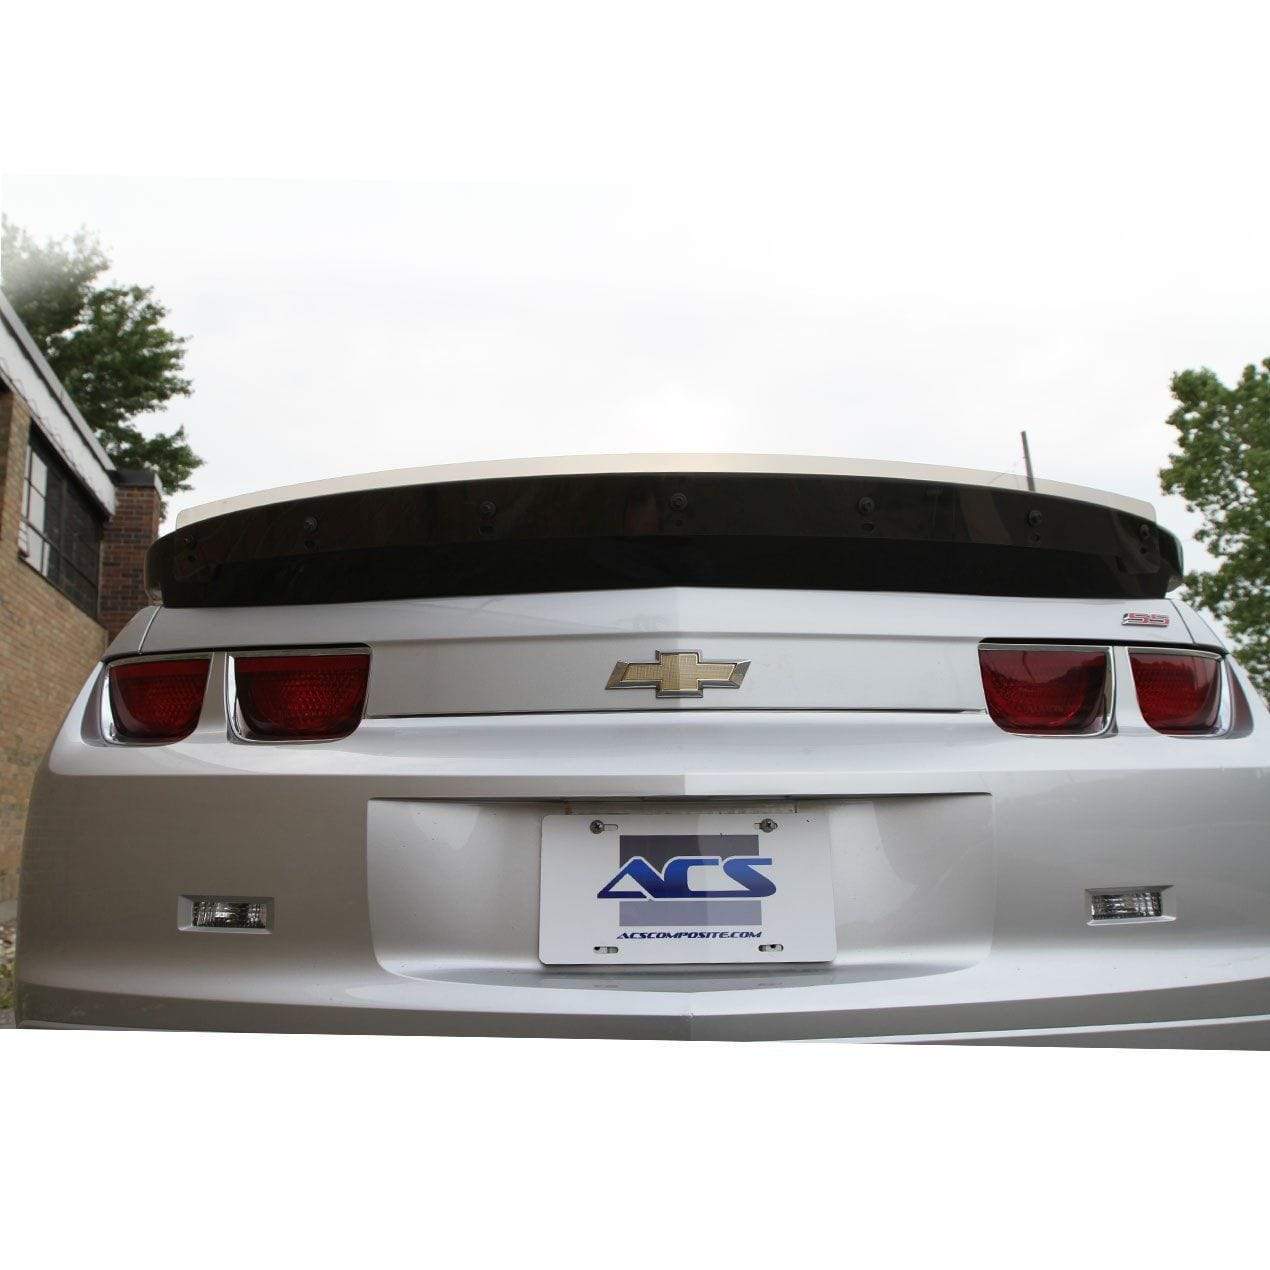 ACS Composite Wicker for Camaro Z/28 Spoiler in Tinted See-Through Material [33-4-169|00-4-007]